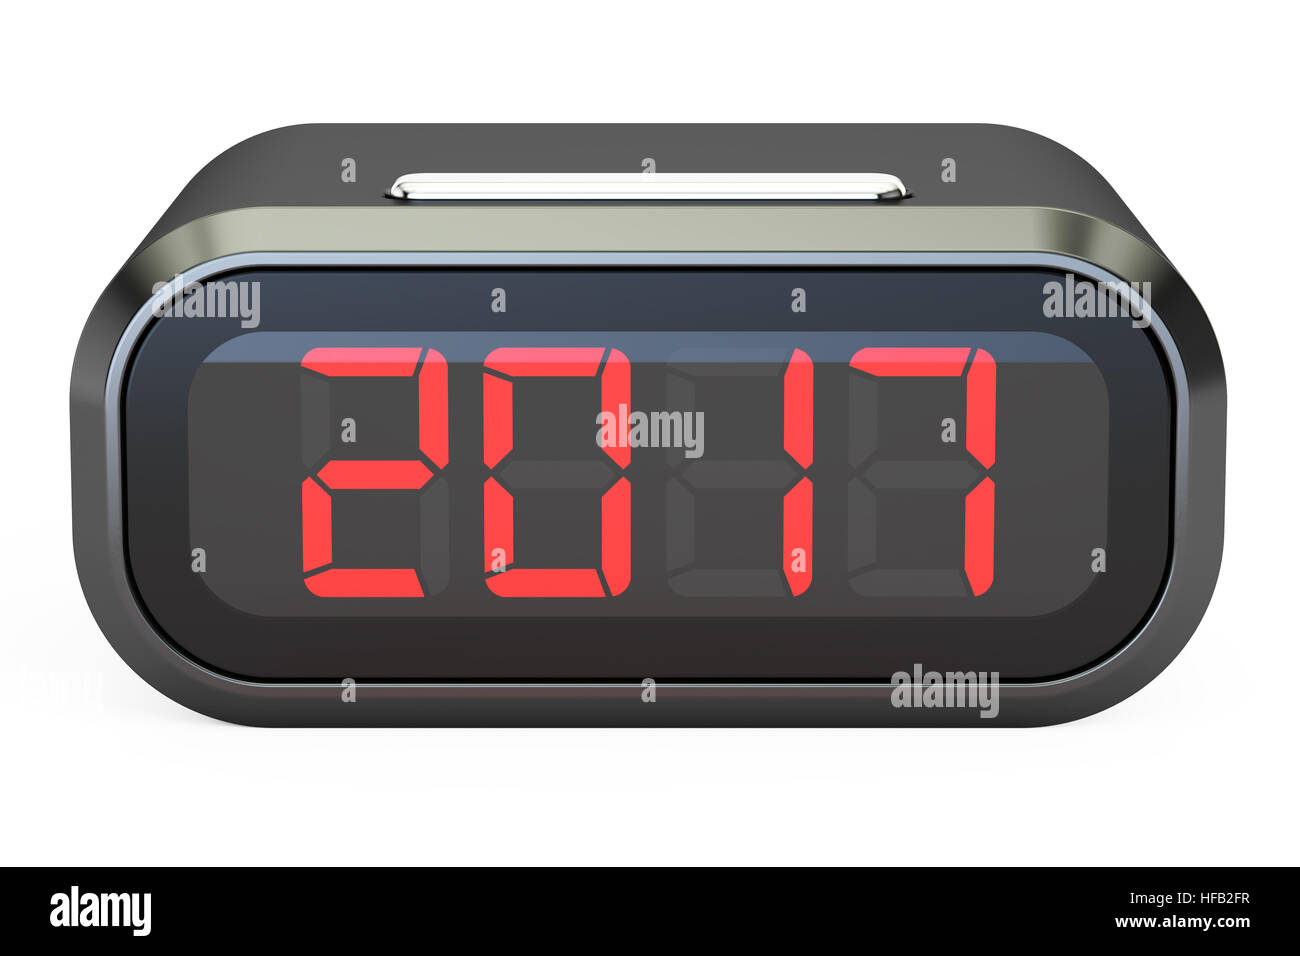 New Year 2017 concept on the digital clock face, 3D rendering isolated on white background Stock Photo